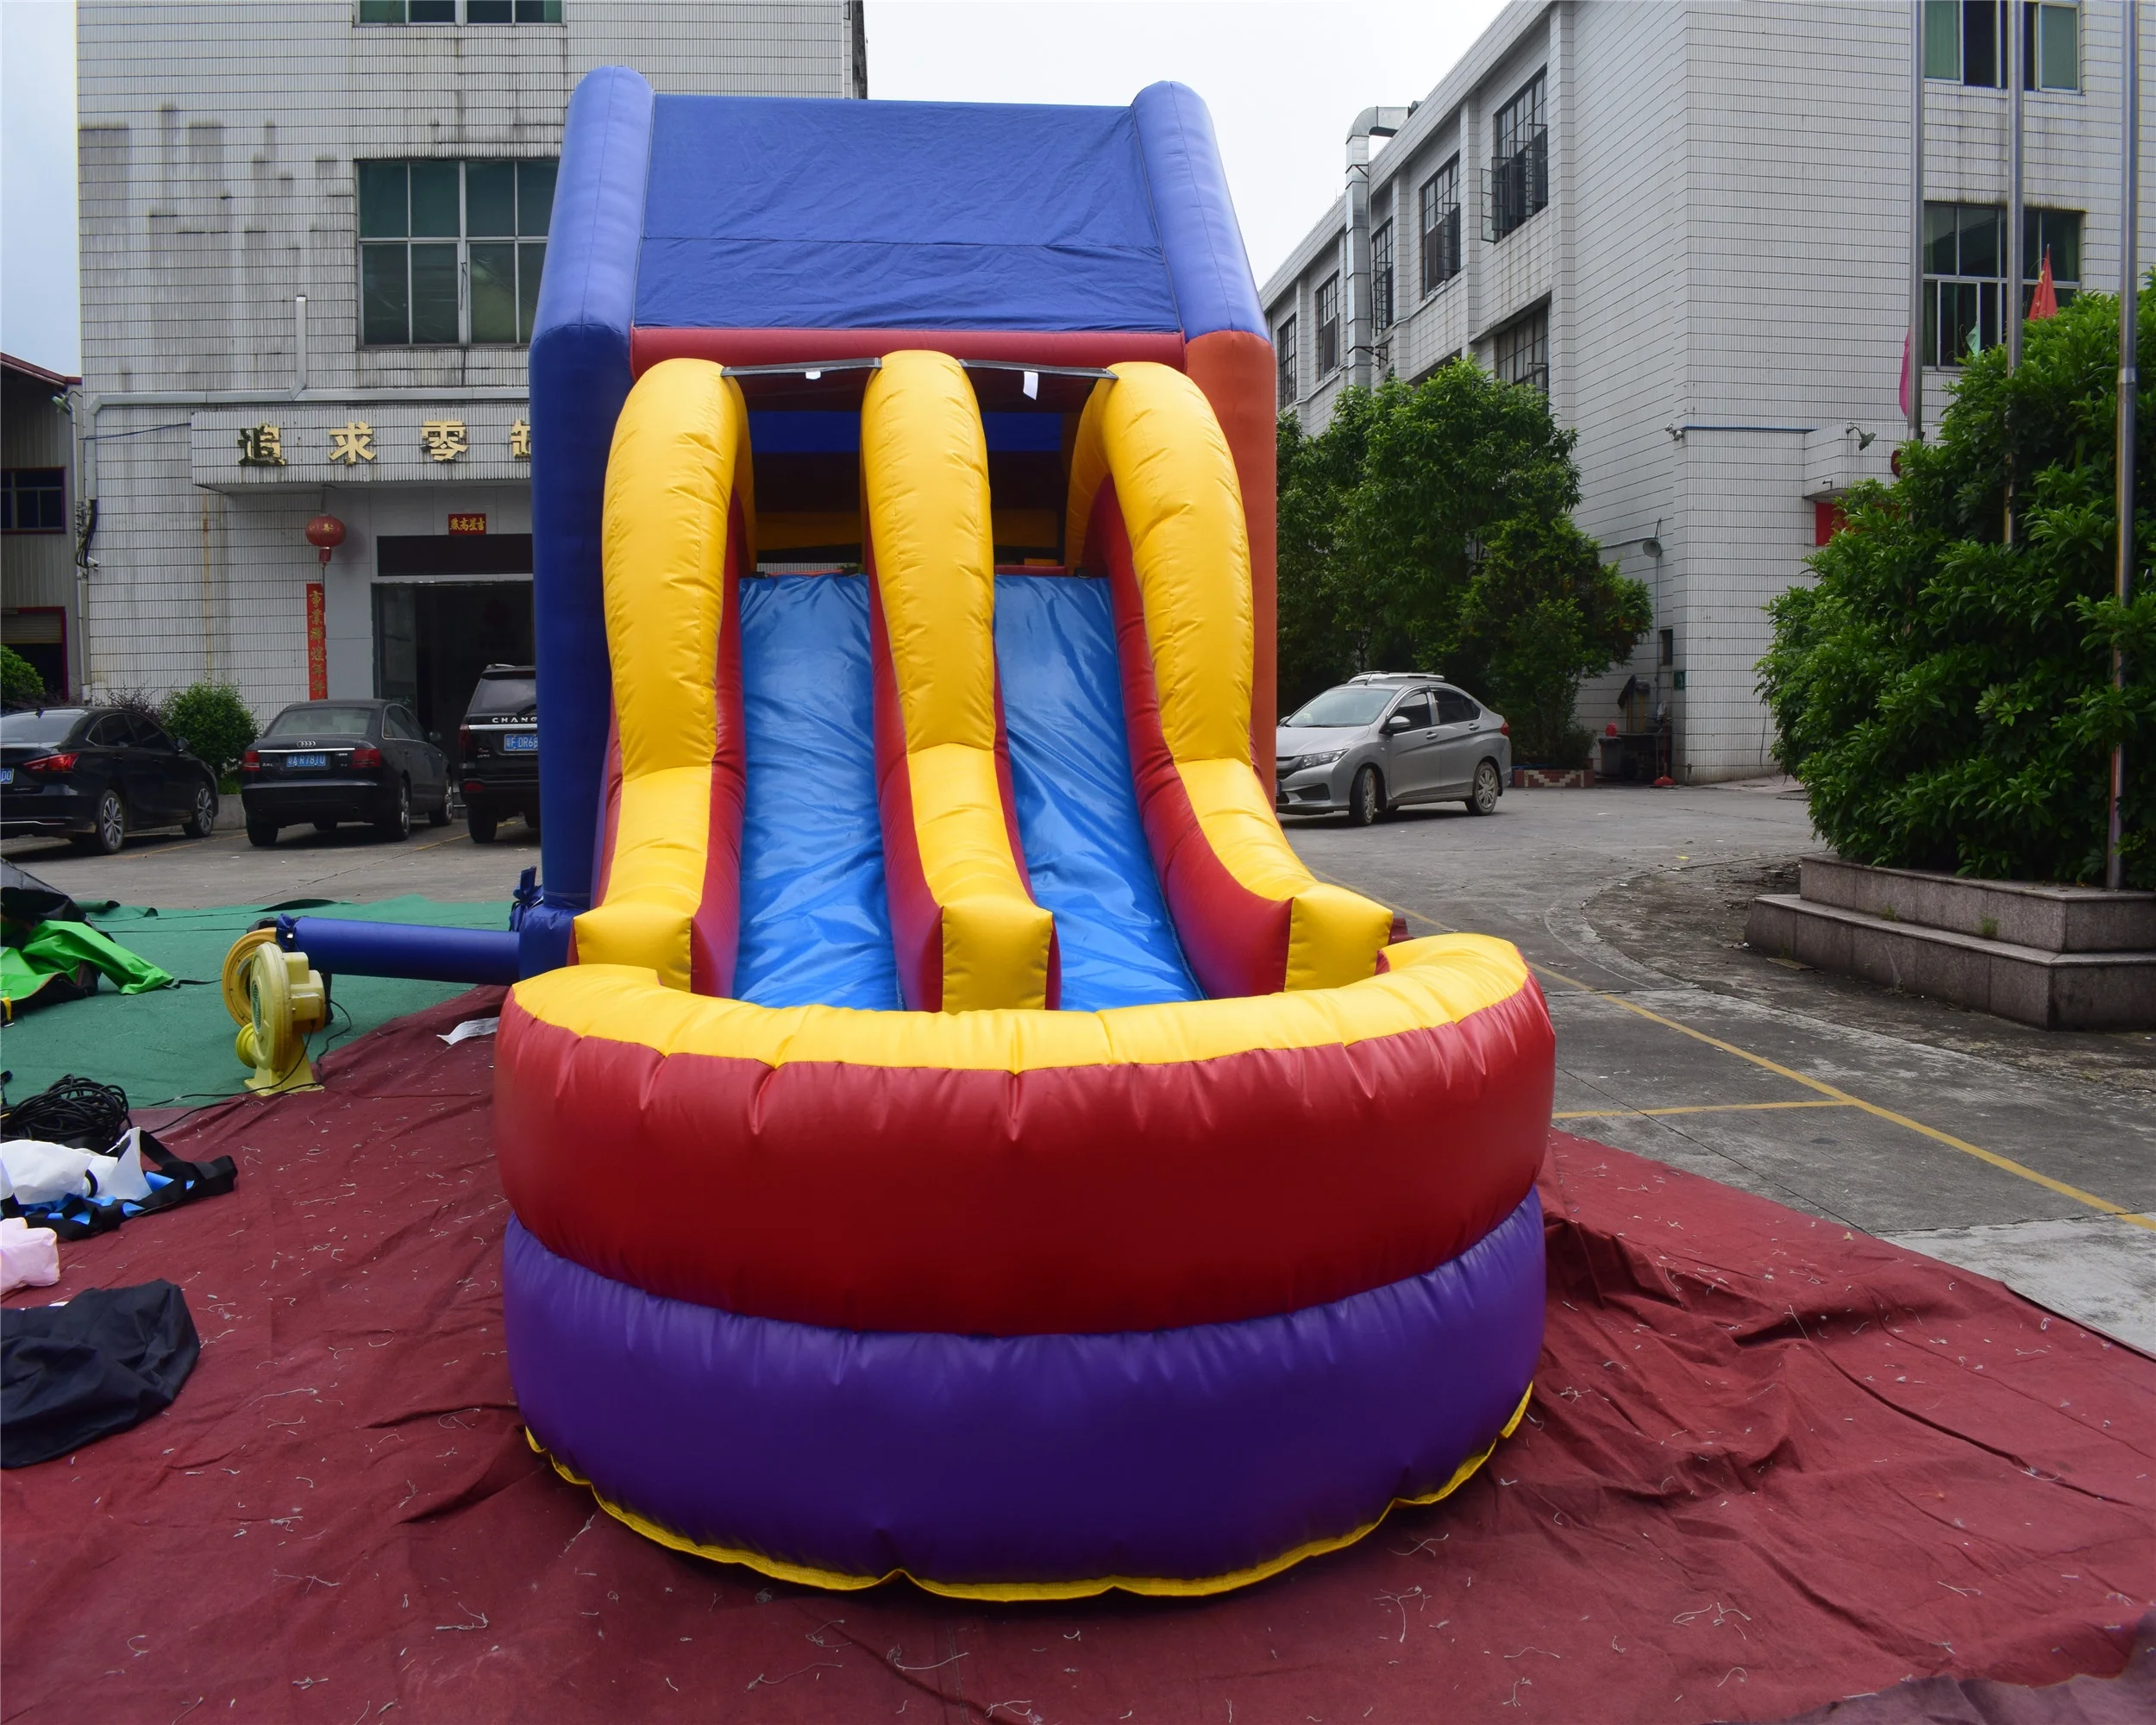 

Small Bounce House Jumper Kids Bouncer Castle Inflatable Trampoline With Slide For Sale, Multi-color, according to your request